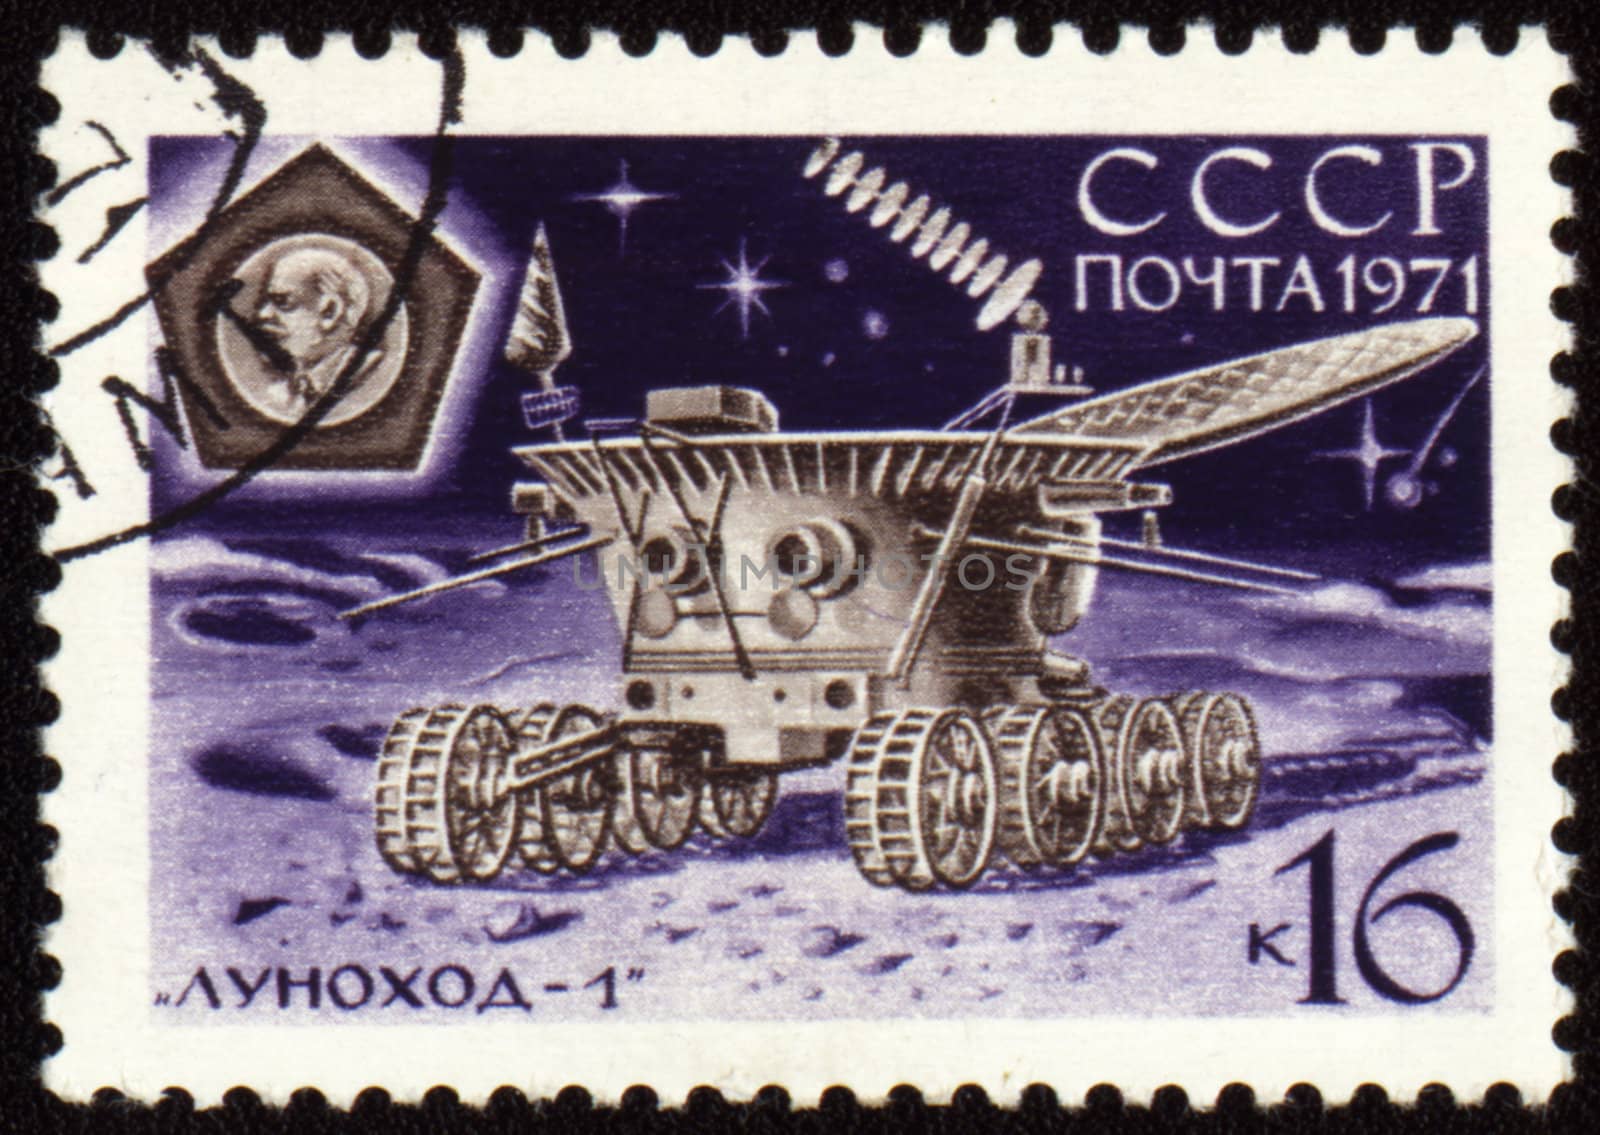 Post stamp with soviet moon machine Lunokhod-1 on Lunar surface by wander